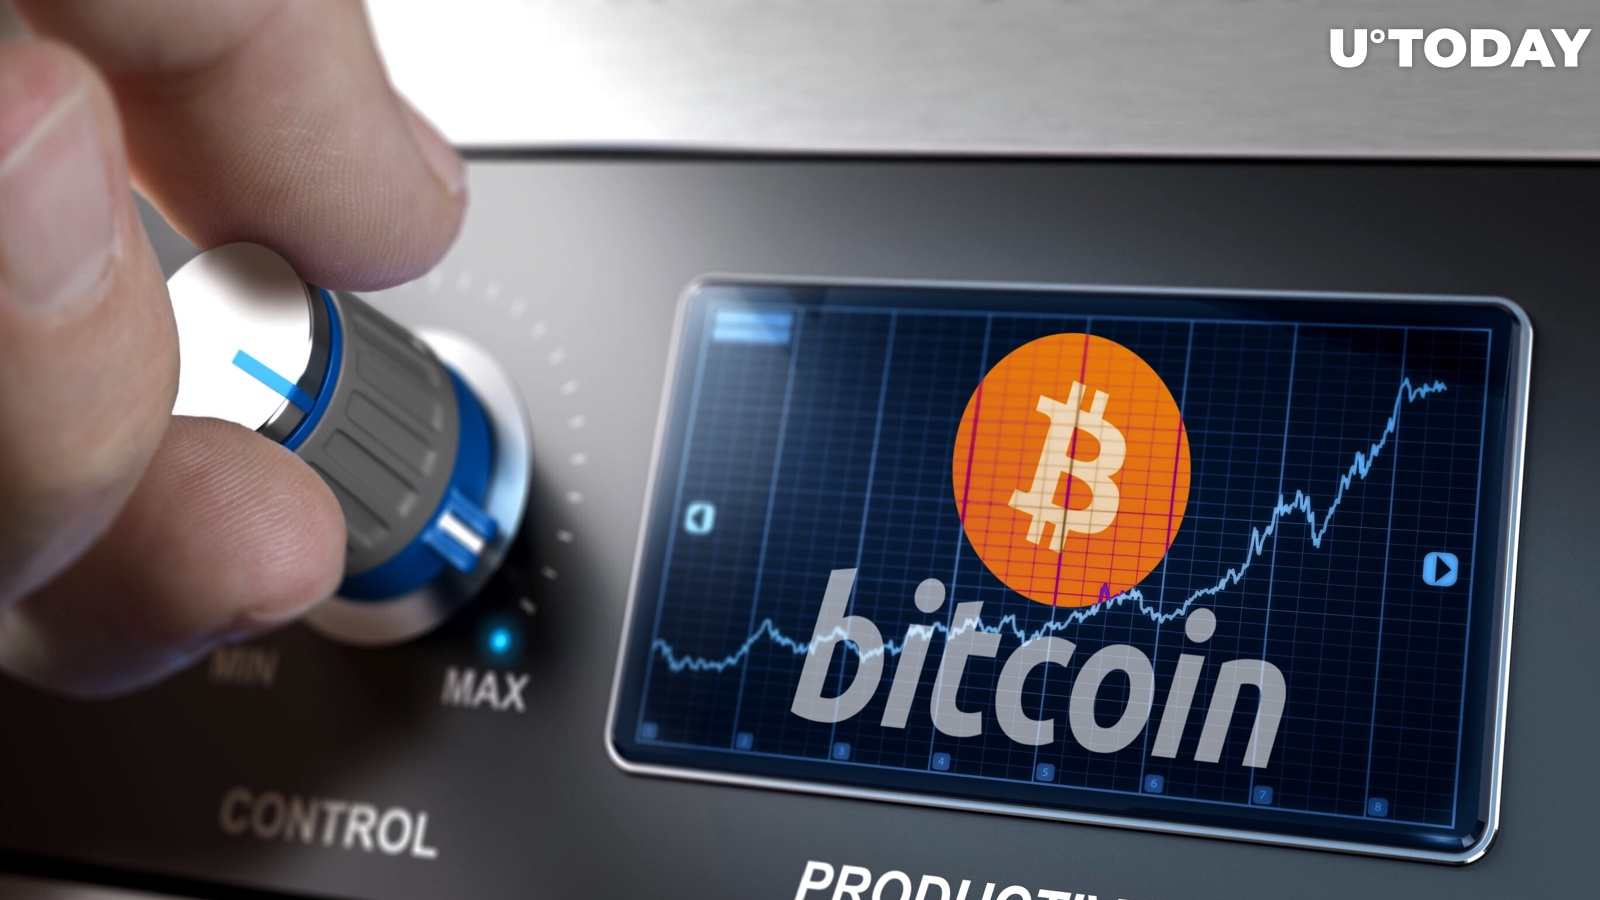 Bitcoin Price Reaches Its New Yearly High After Breaking Above $5,500, Bitcoin Cash, Litecoin, and Other Altcoins Surging 